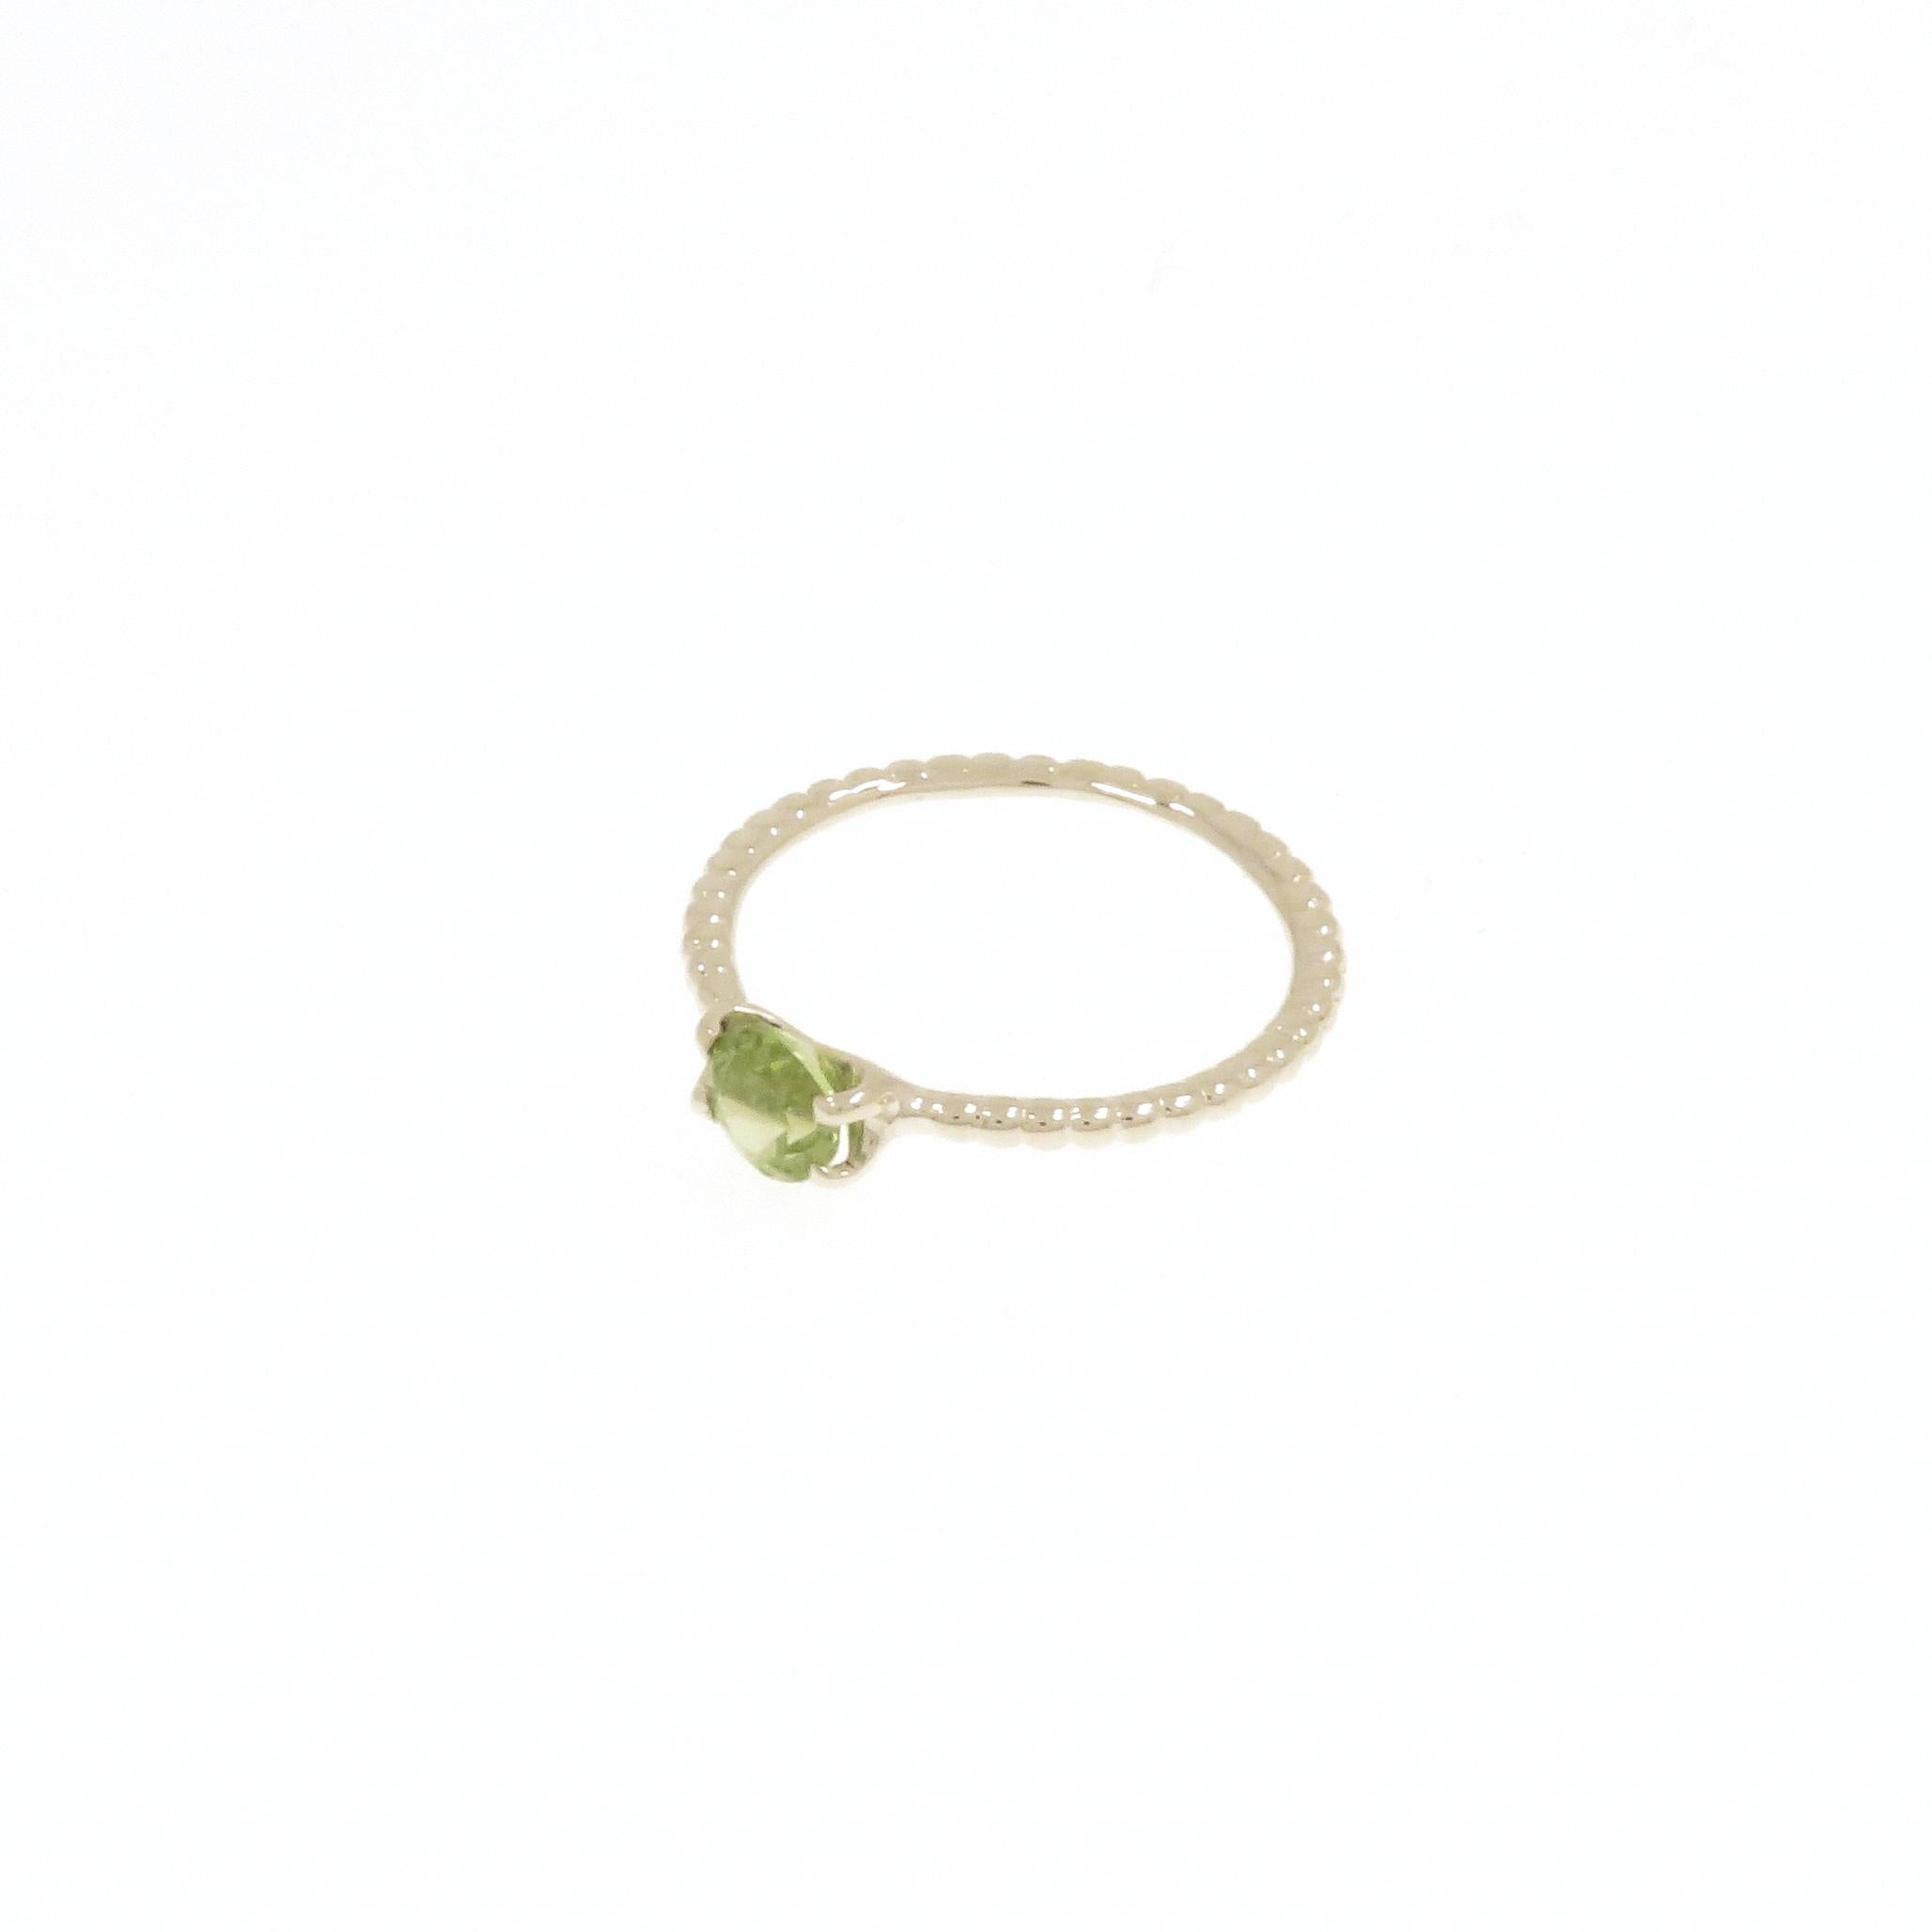 Brilliant Cut Peridot Withe Gold Stacking Ring Handcrafted in Italy by Botta Gioielli